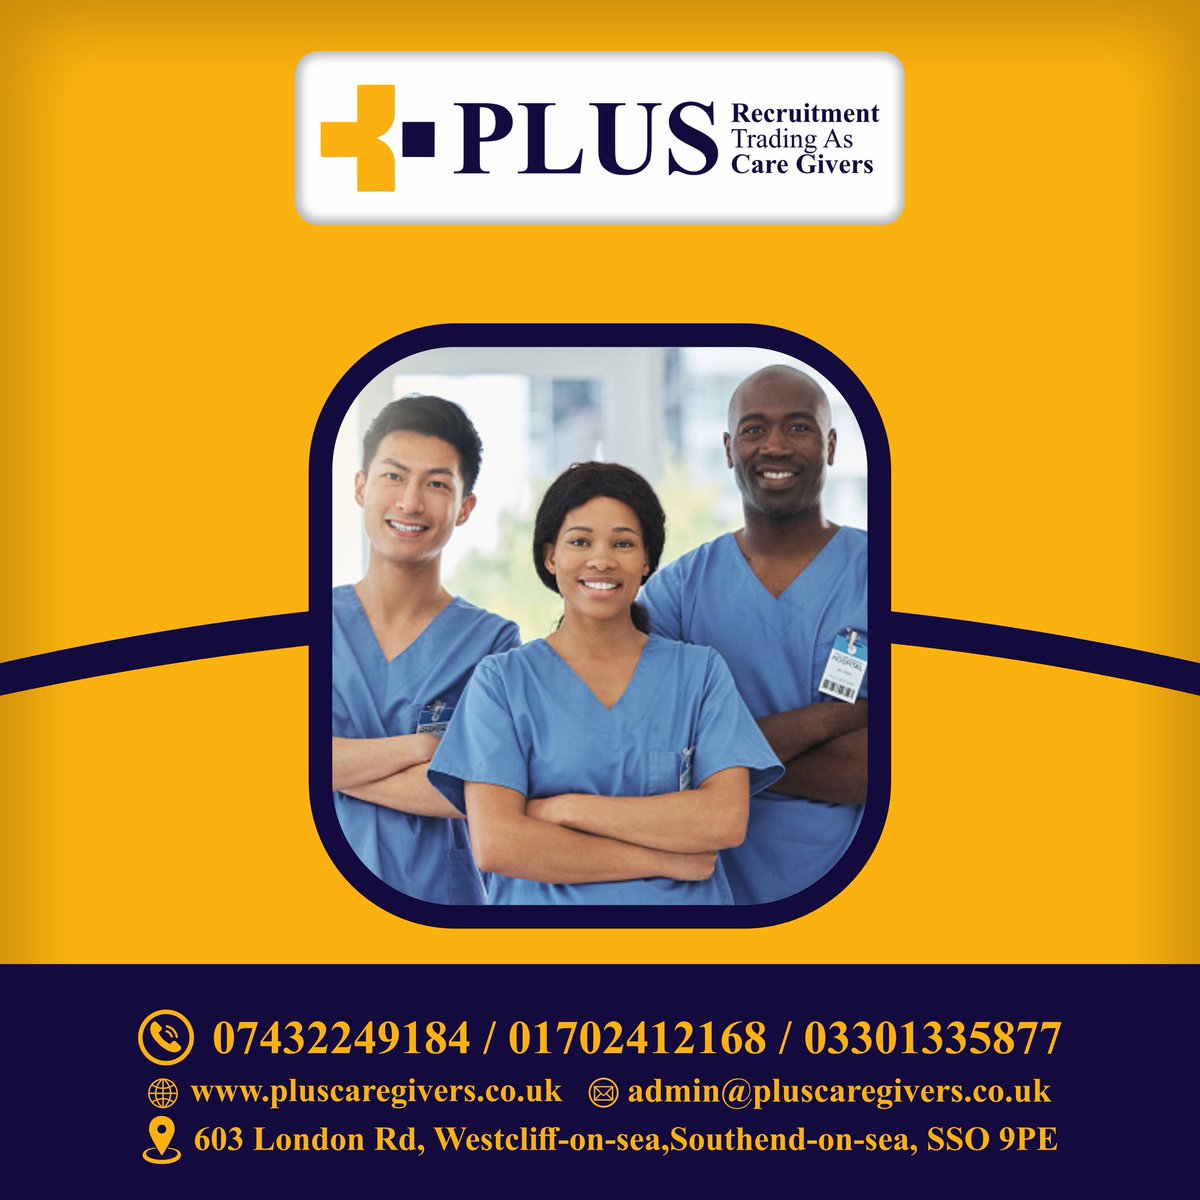 @pluscarep 

*Introducing home care experience with Plus Care Givers*

At plus care givers,Our domiciliary care services offer personalized support and attention right in the comfort of your own home.

#PlusCareGivers
 #HomeCare
 #DomiciliaryCare